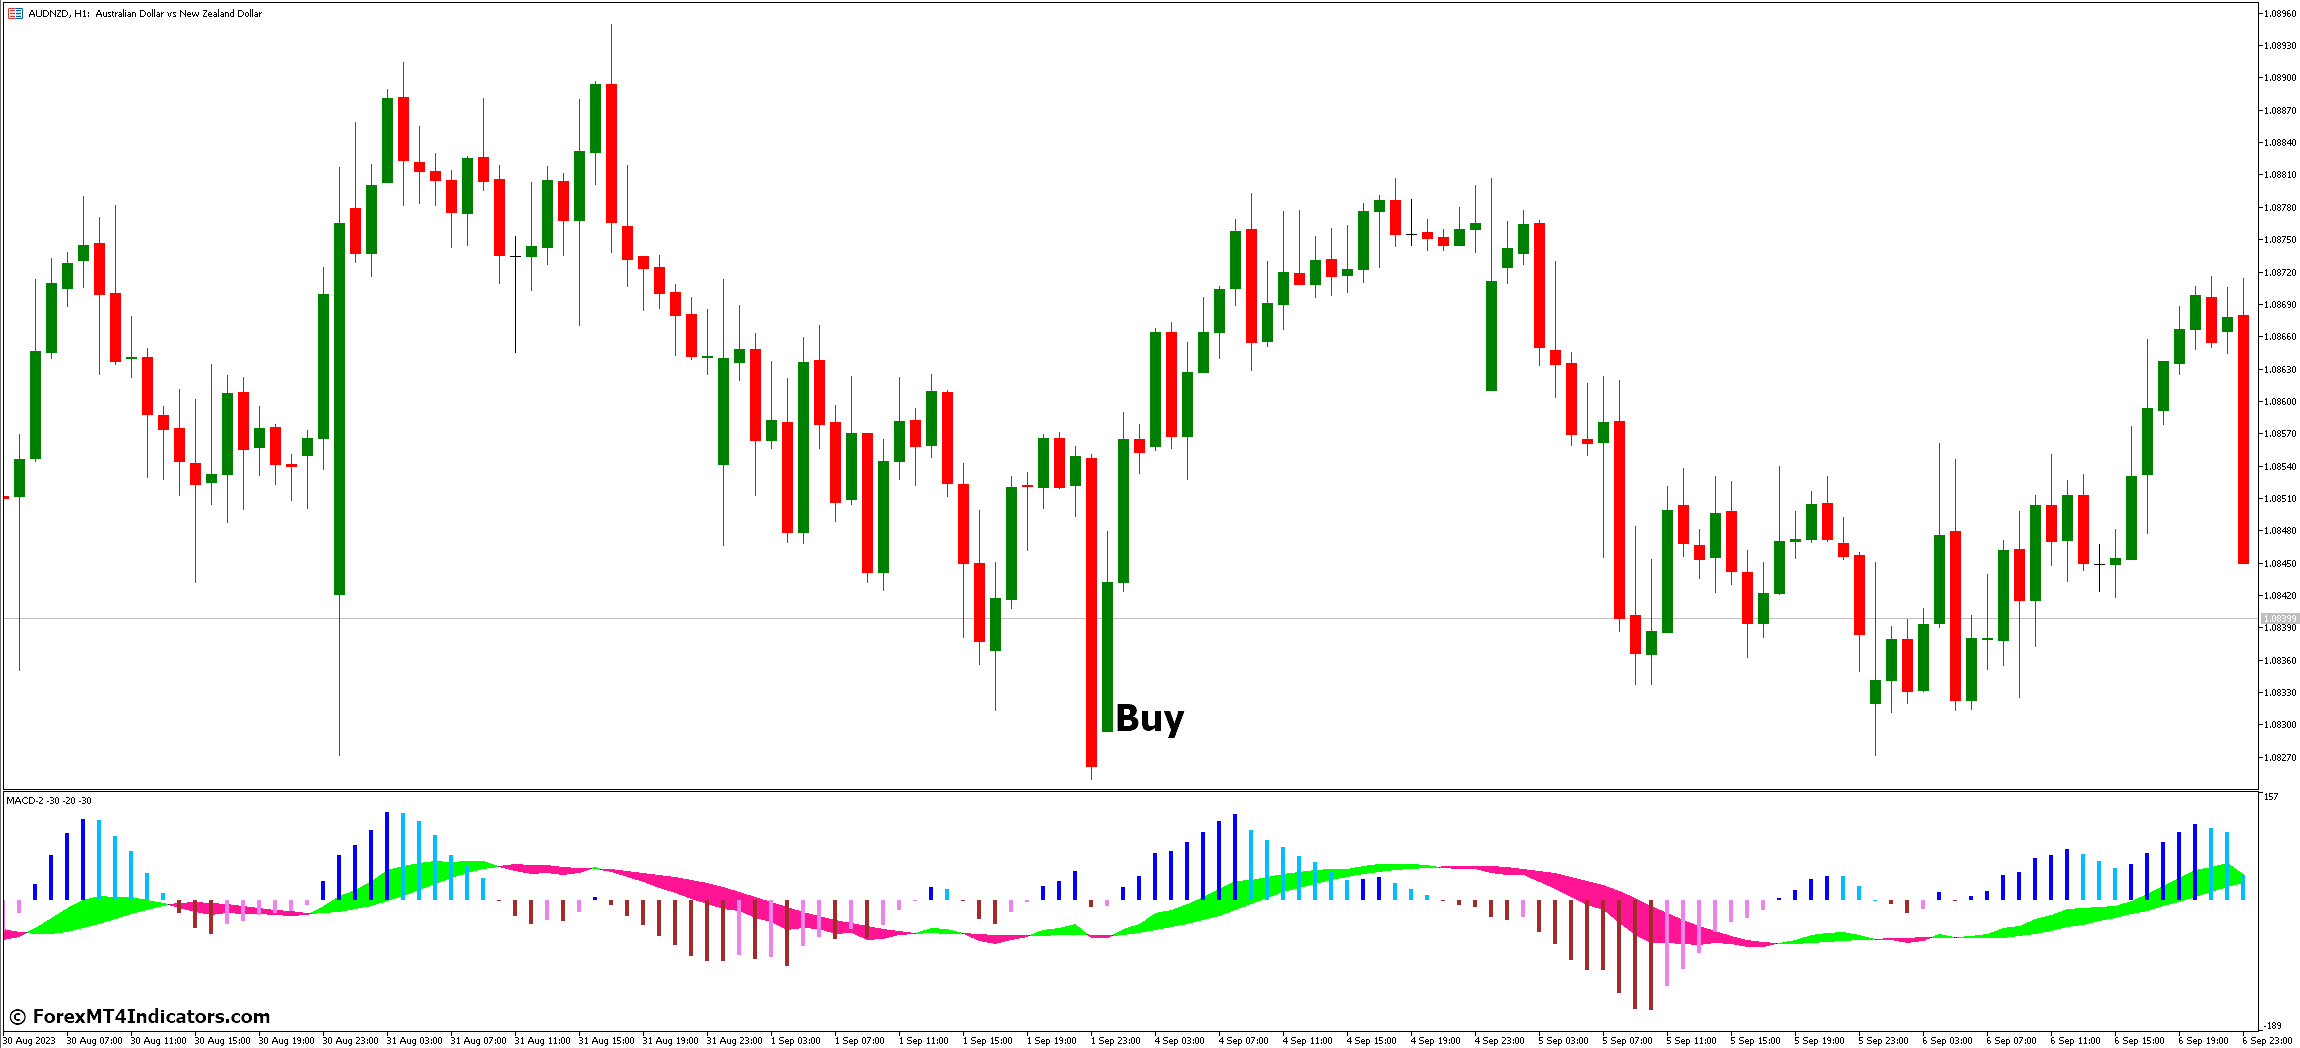 How to Trade with MACD 2 MT5 Indicator - Buy Entry